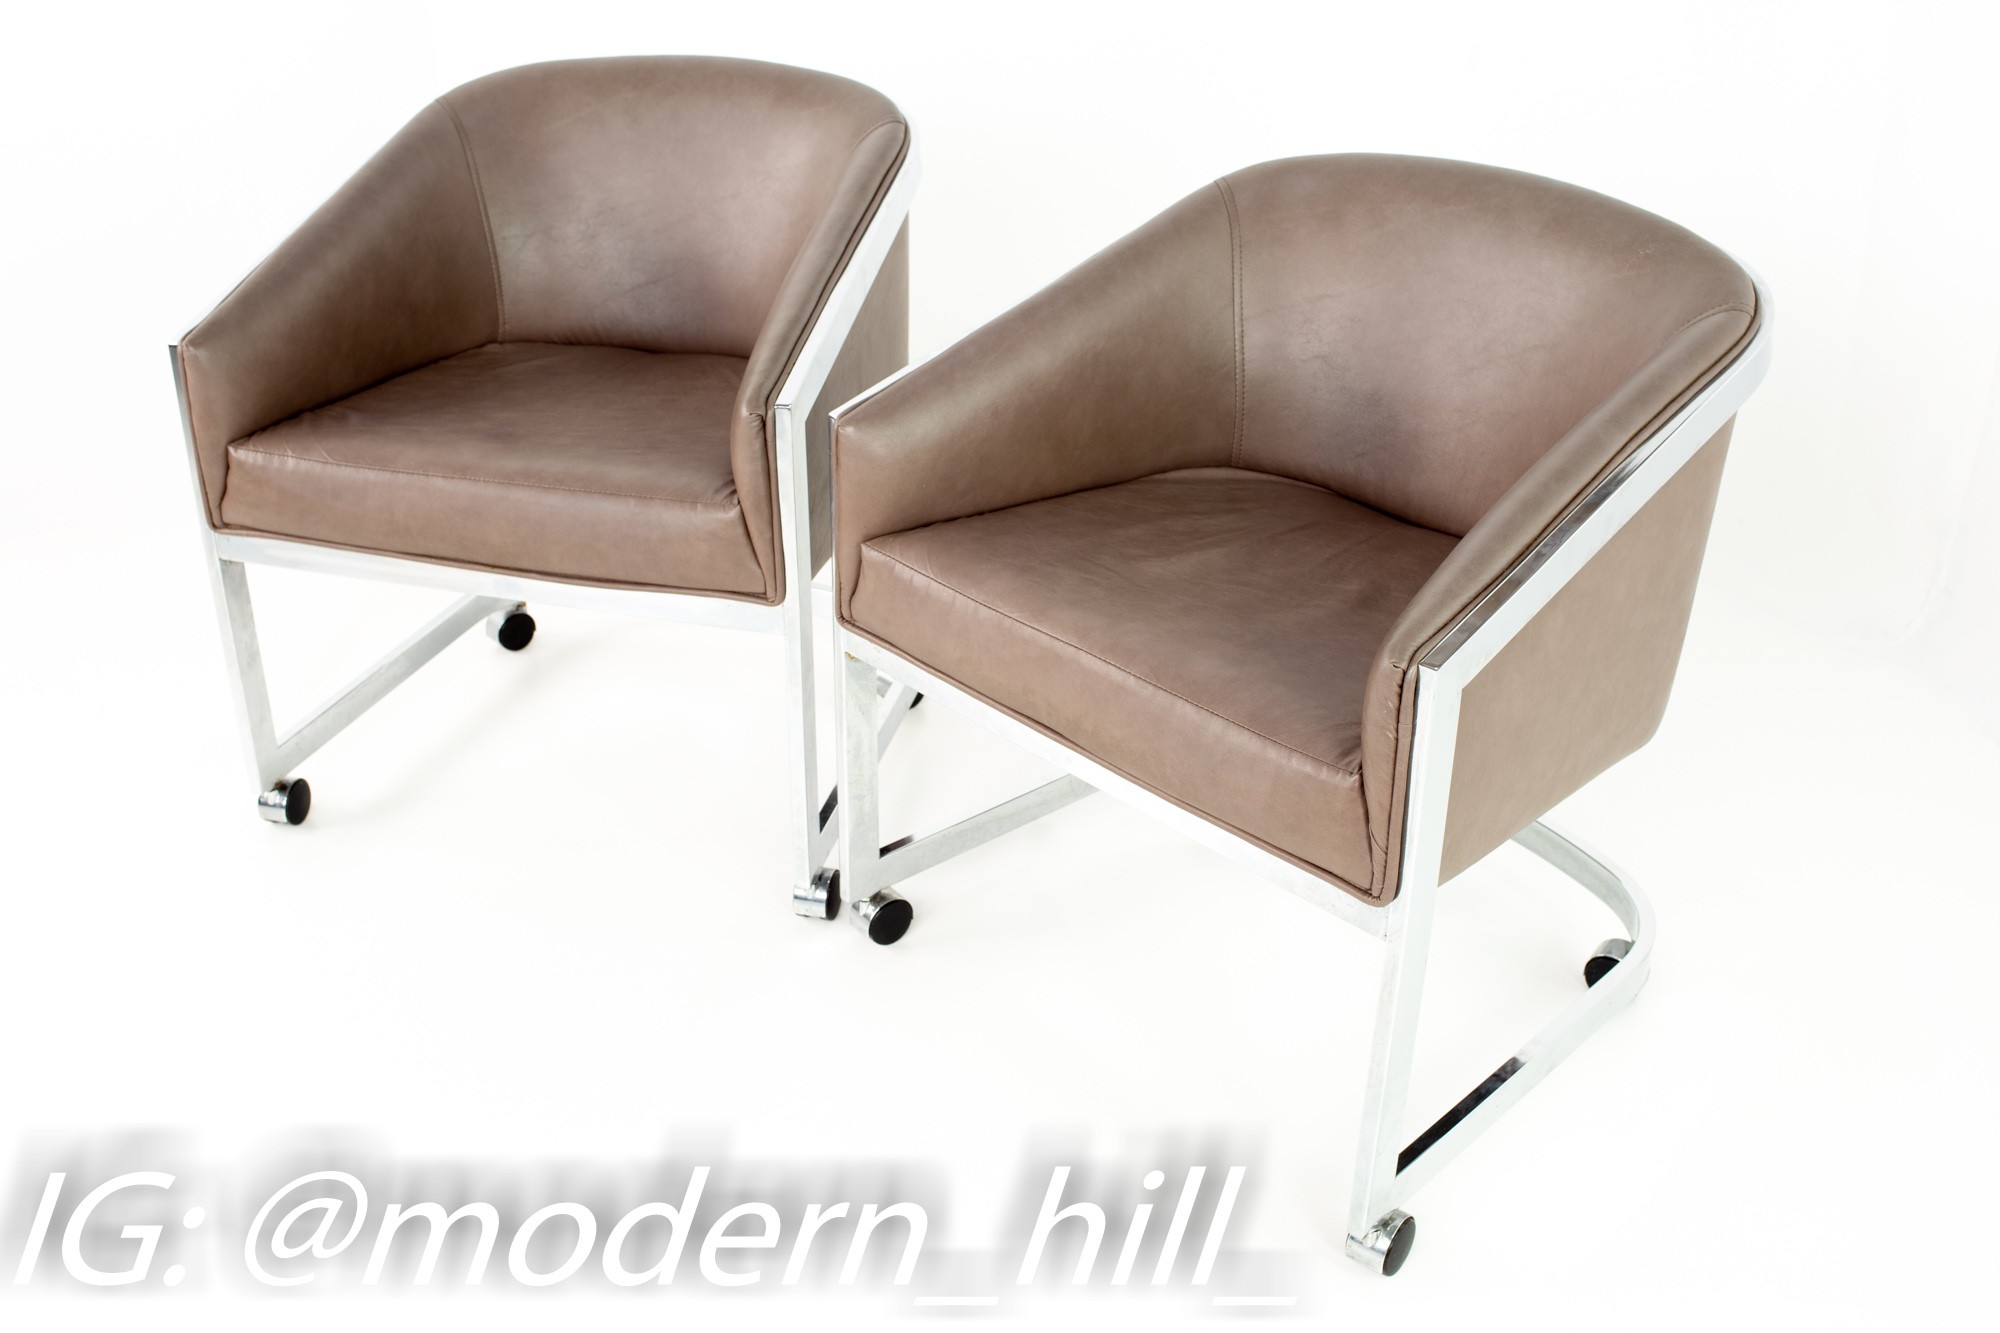 Milo Baughman for Design Institute of America Mid Century Modern Chrome Side Lounge Club Chairs with Casters - Pair